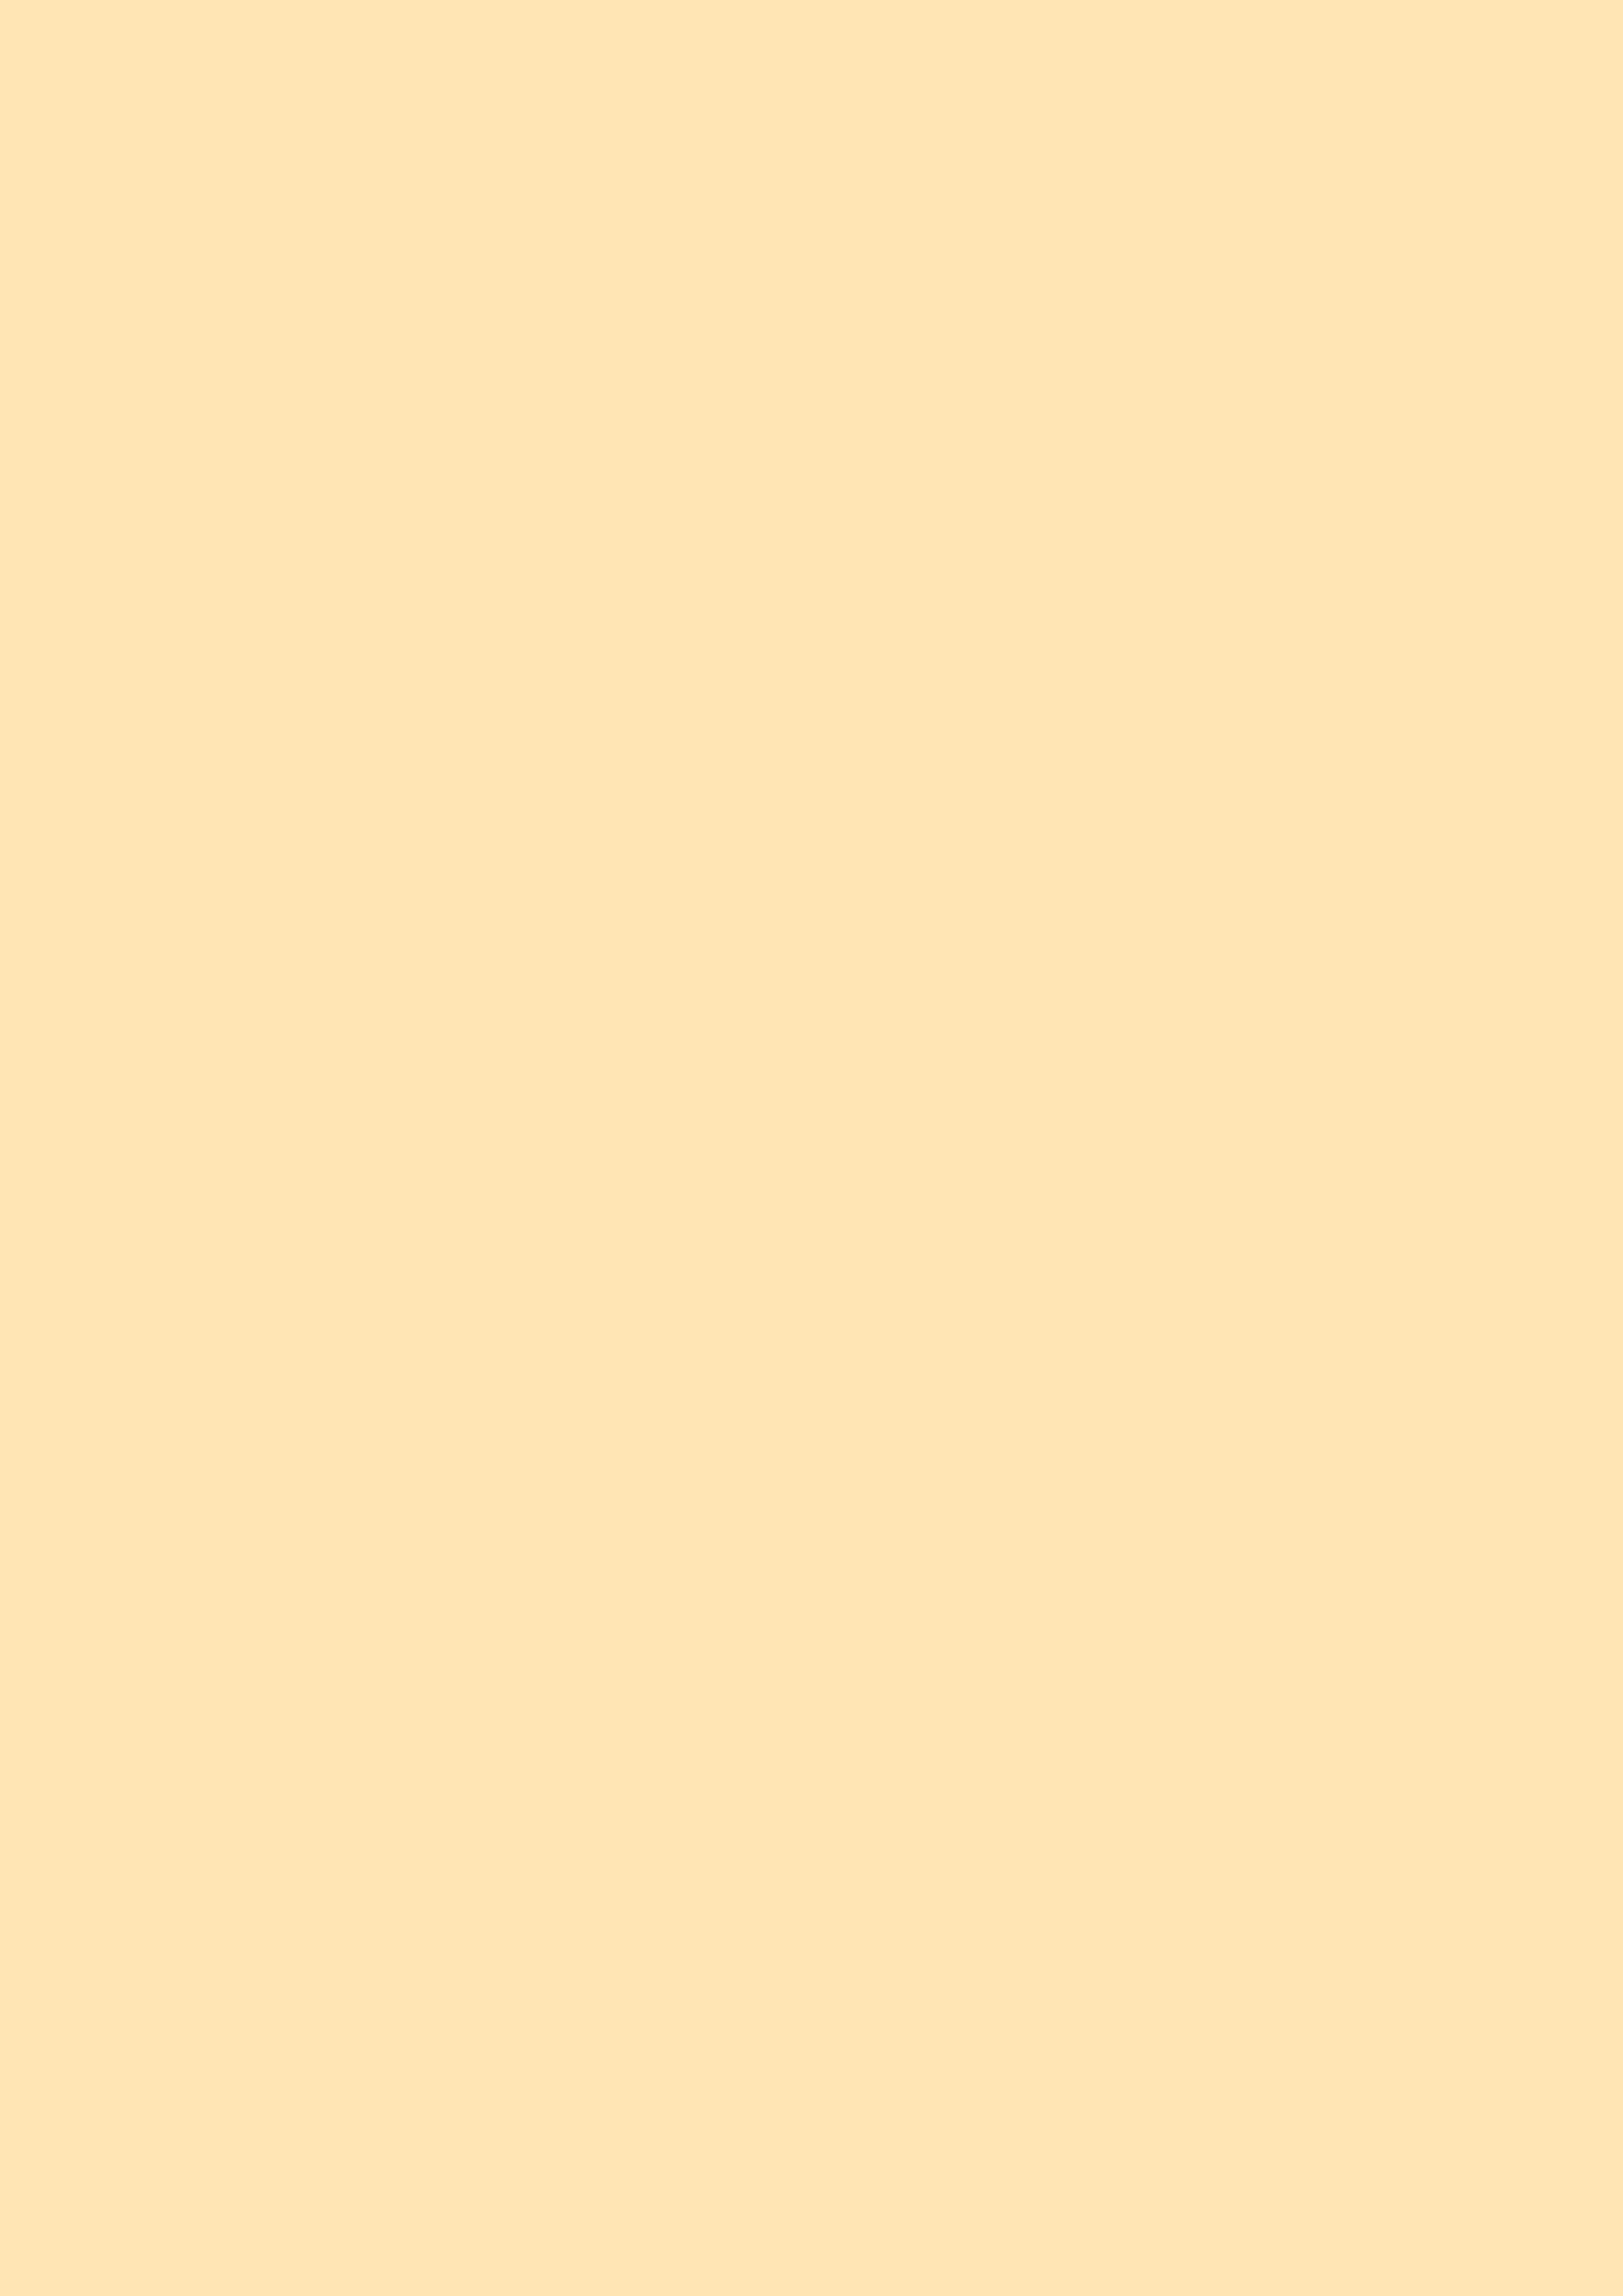 2480x3508 Peach Solid Color Background